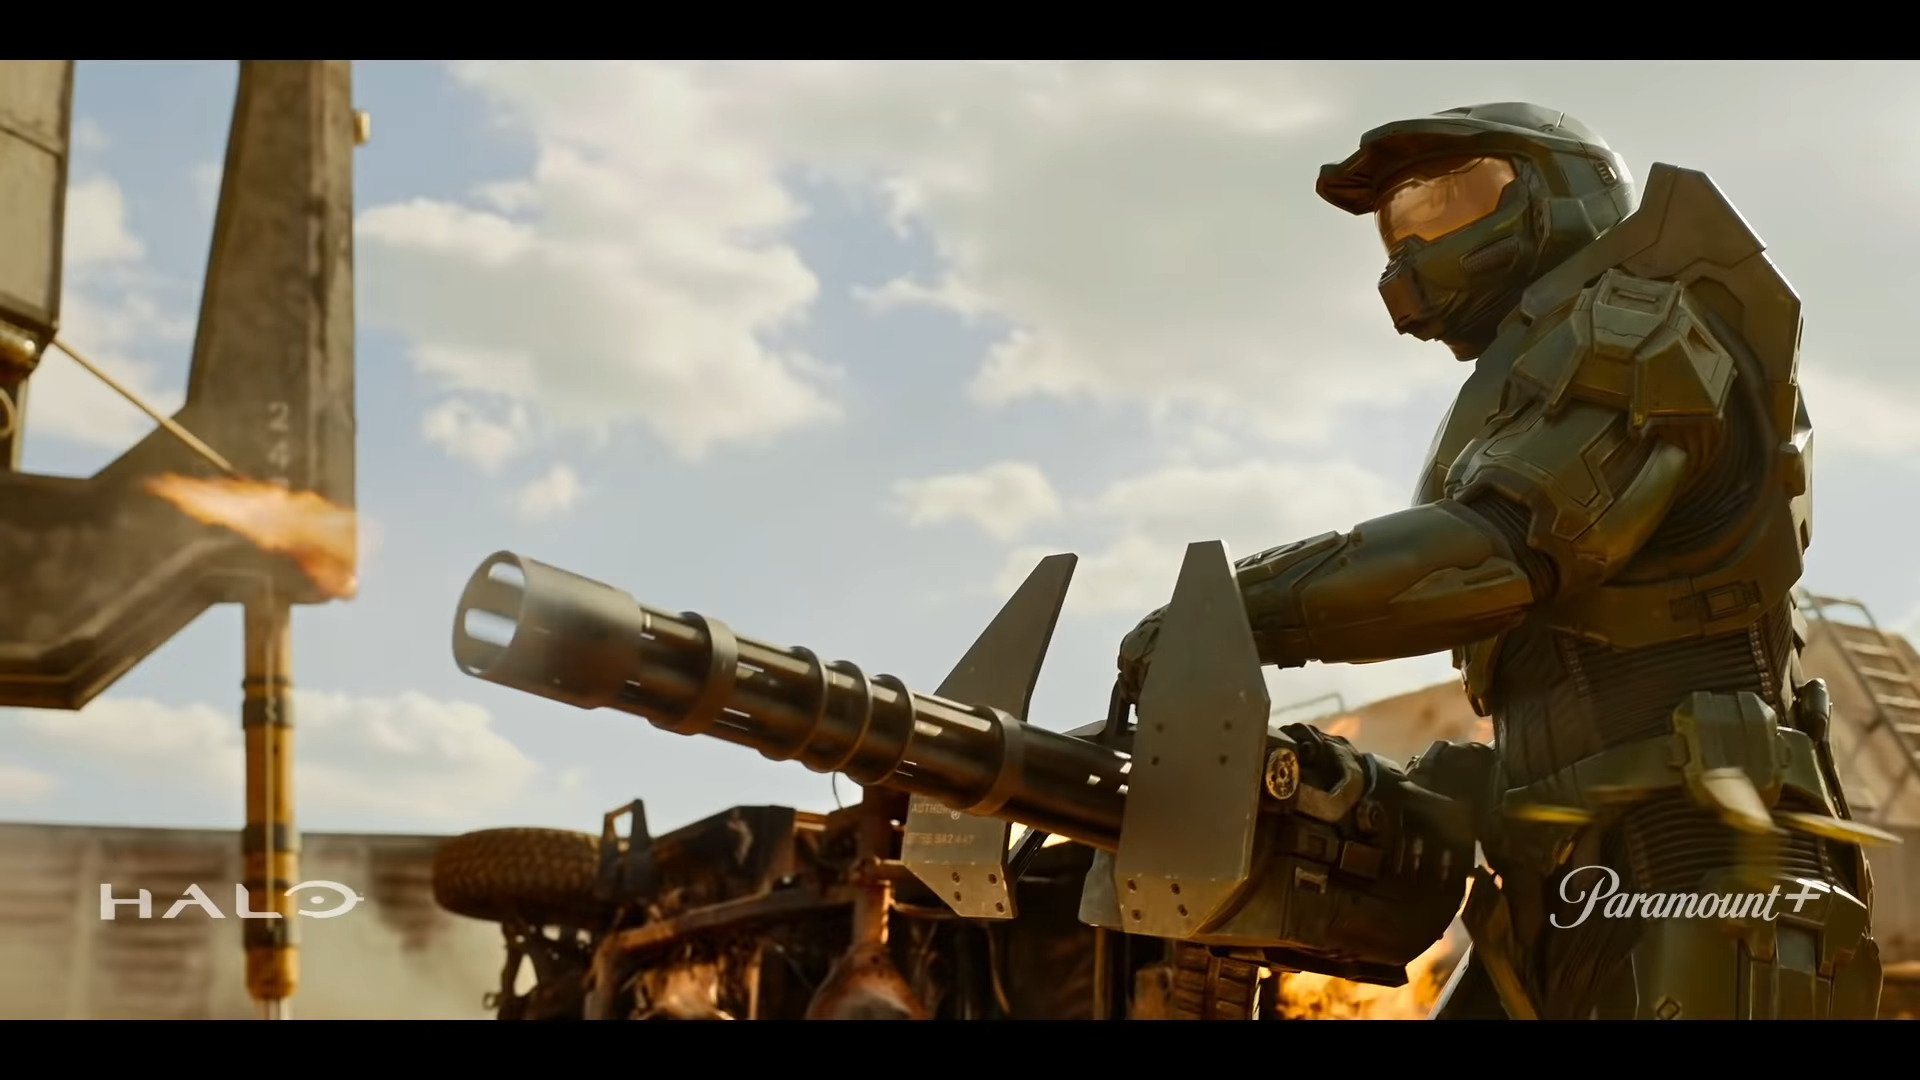 Halo TV Series To Completely Change Master Chief's Character, Focus On Quan  Ah For “Human Perspective” - Bounding Into Comics